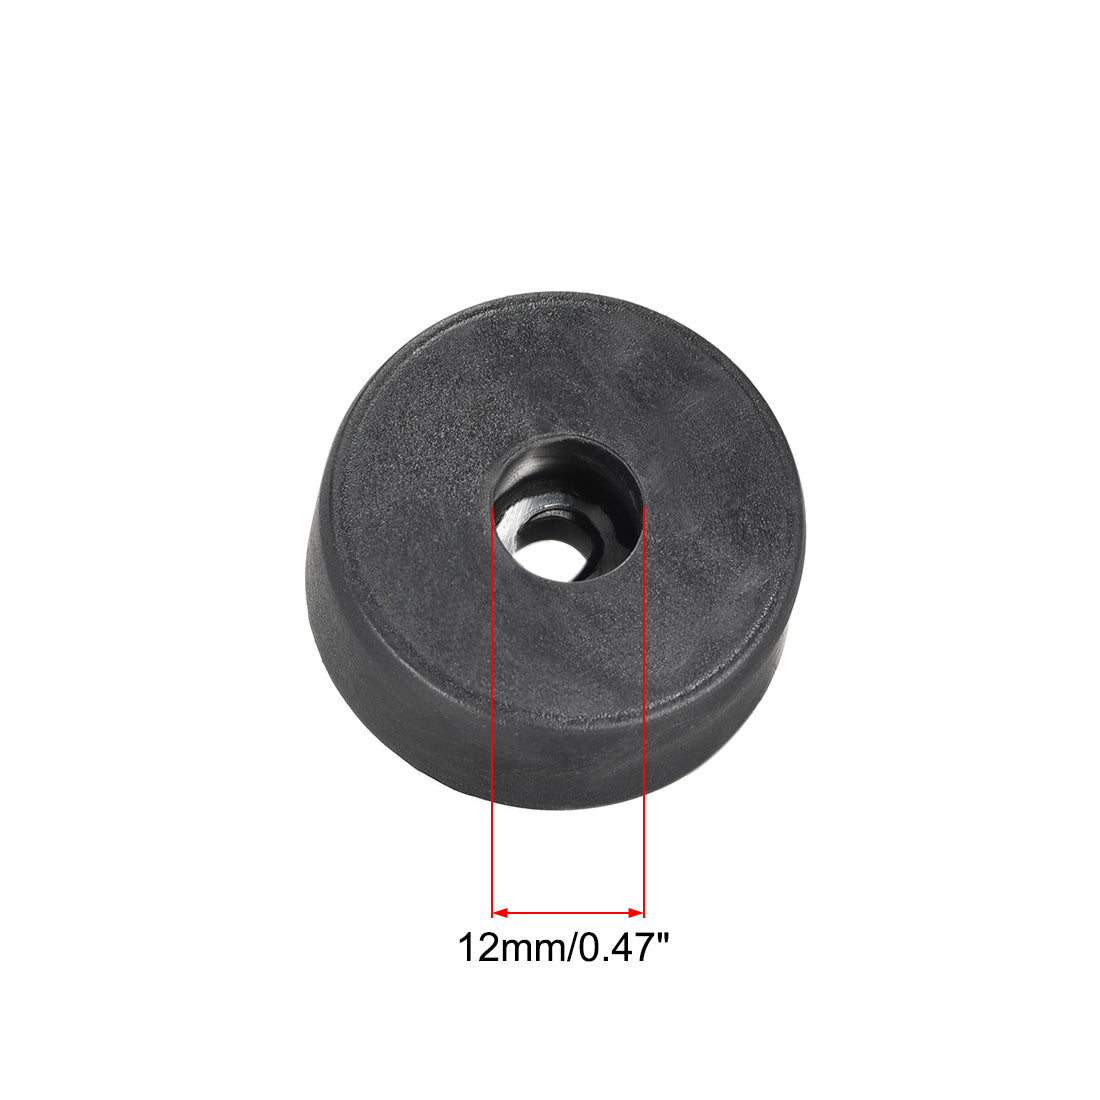 uxcell Uxcell 4 Pcs D37xH15mm Rubber Feet Anti-Vibration Base Pad Stand for Speaker Guitar Amplifier HiFi